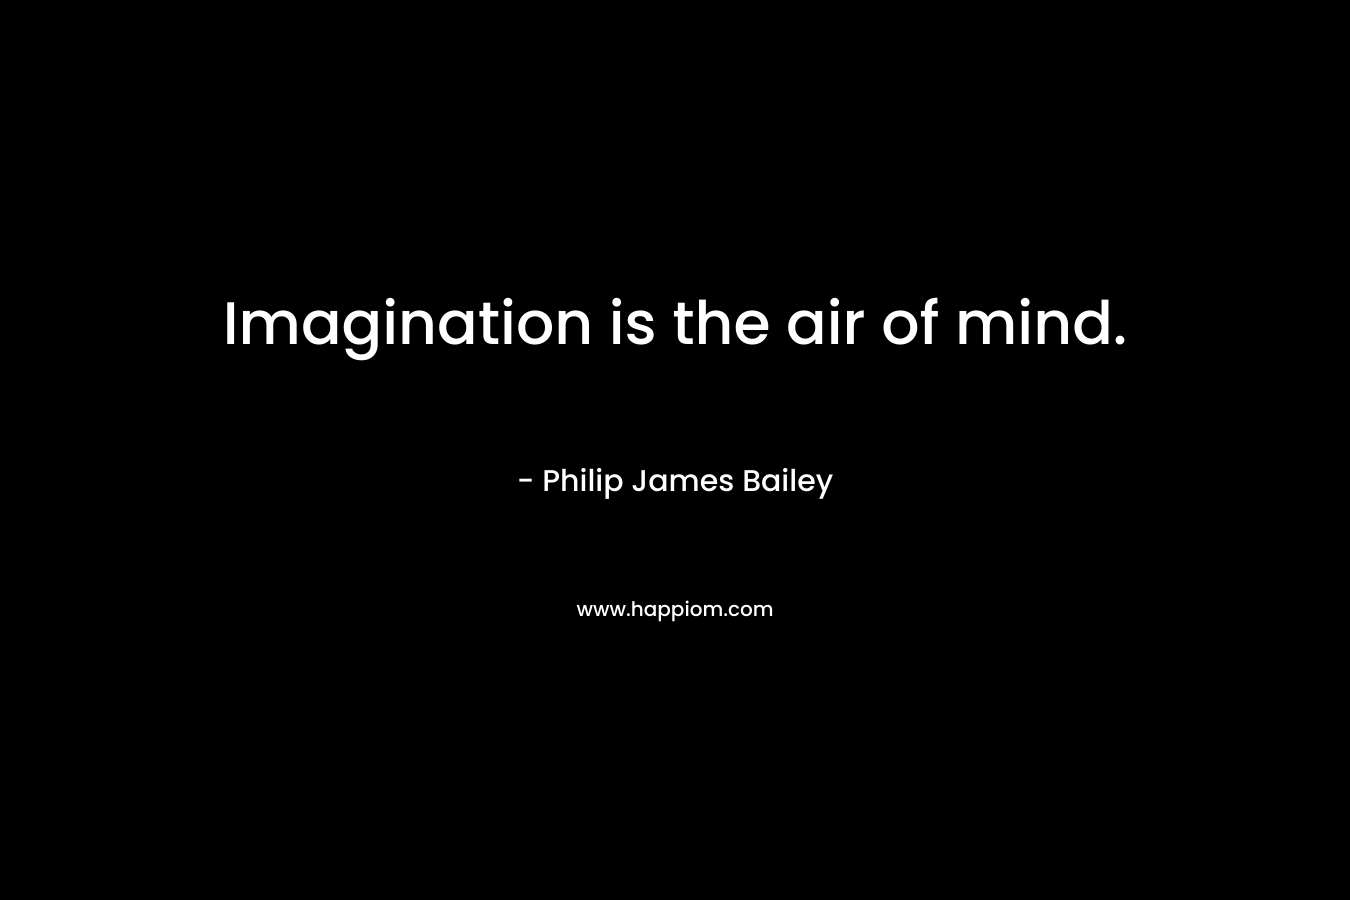 Imagination is the air of mind.